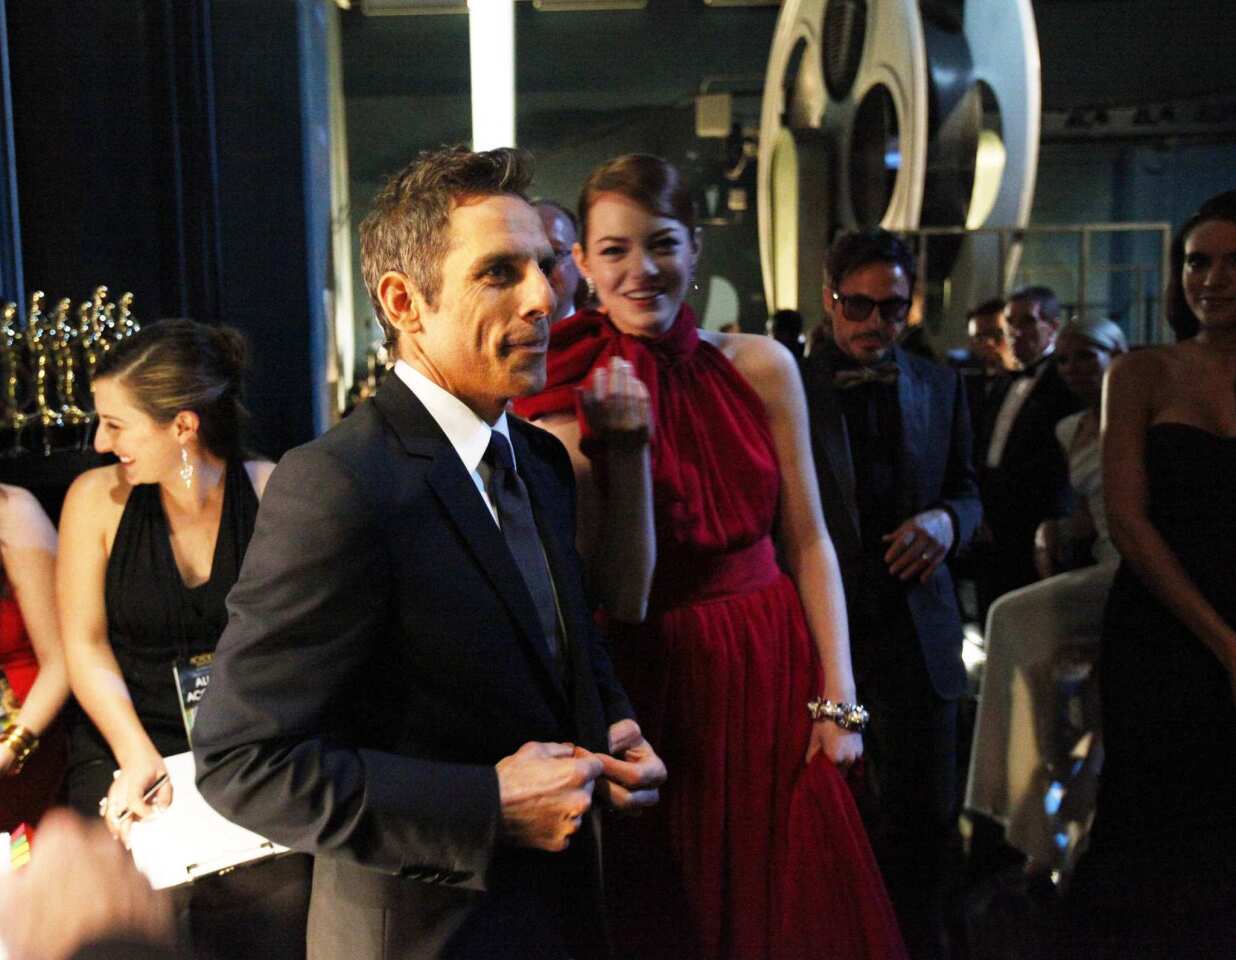 Oscar presenters Ben Stiller, left, and Emma Stone backstage at the 2012 Academy Awards in Hollywood.